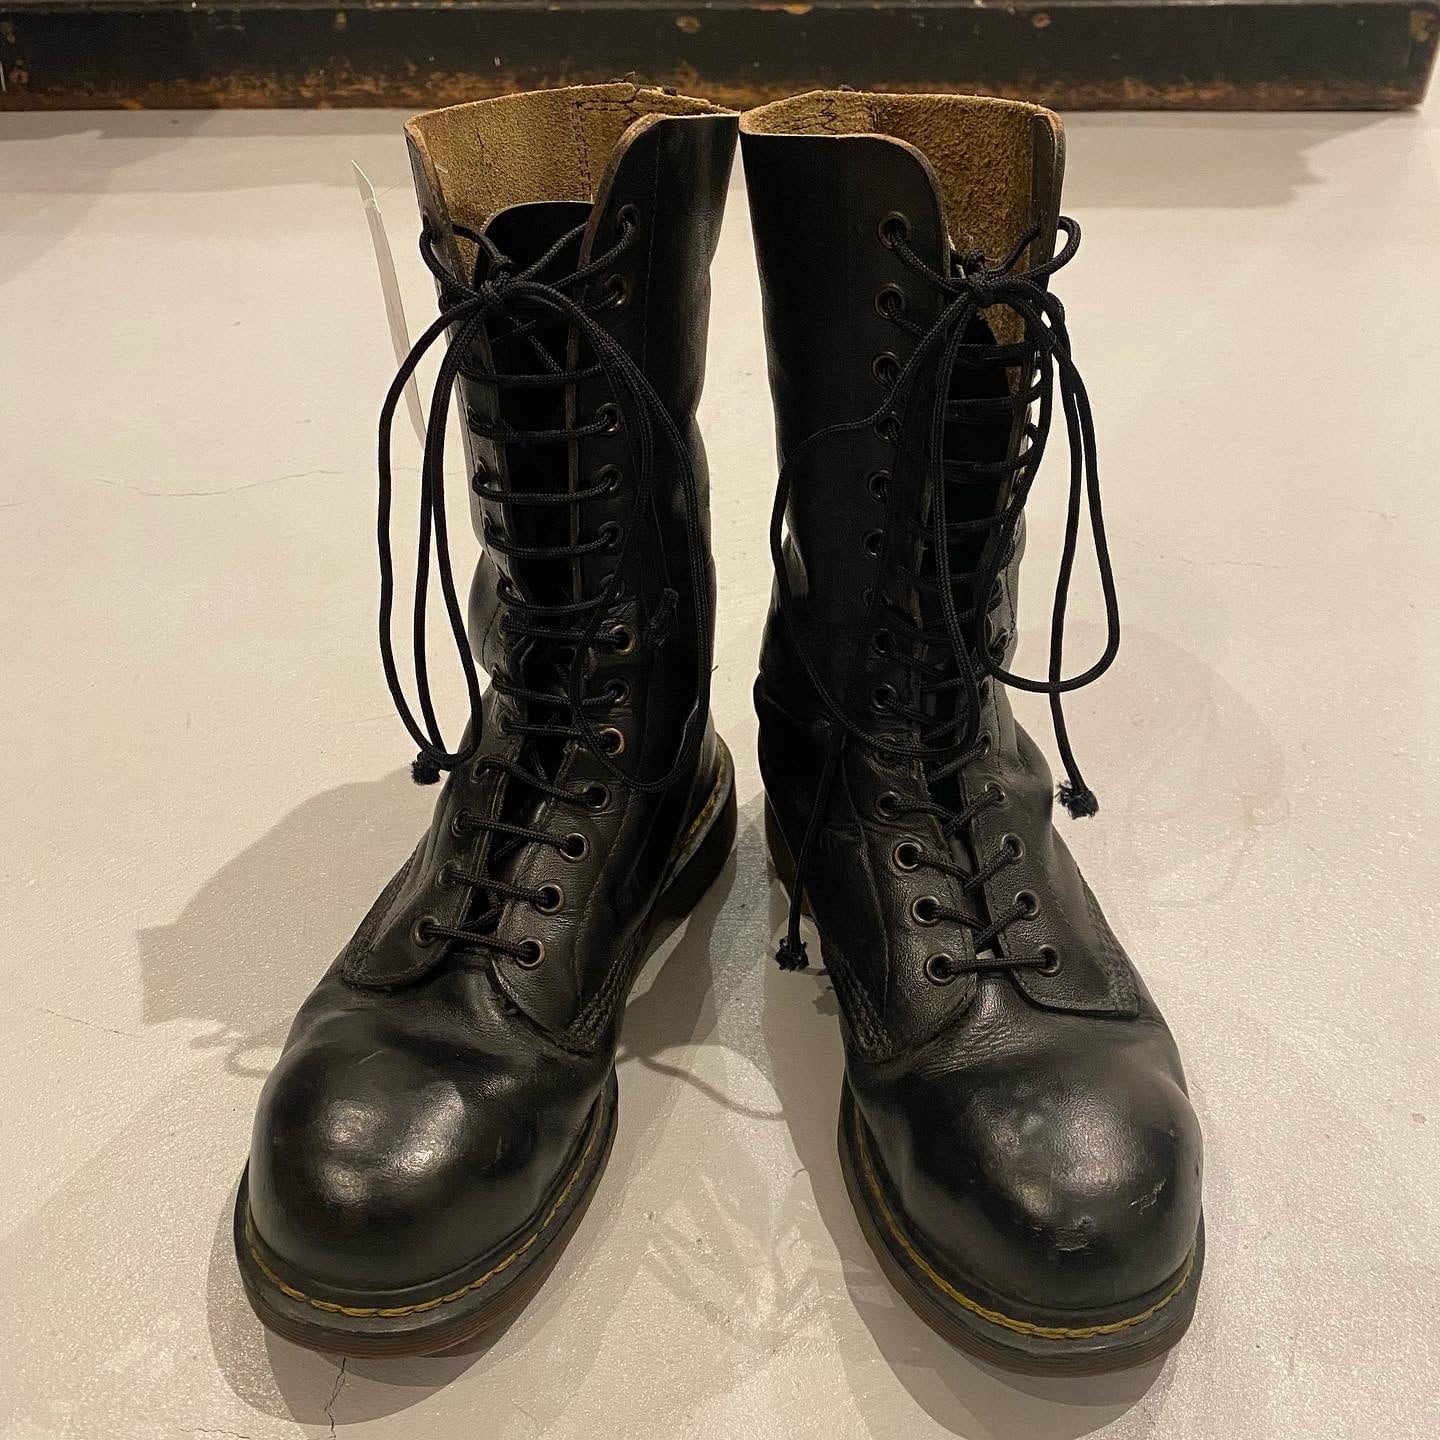 MADE IN ENGLAND !! Dr. martens 14hole boots "steel toe" | What'z up